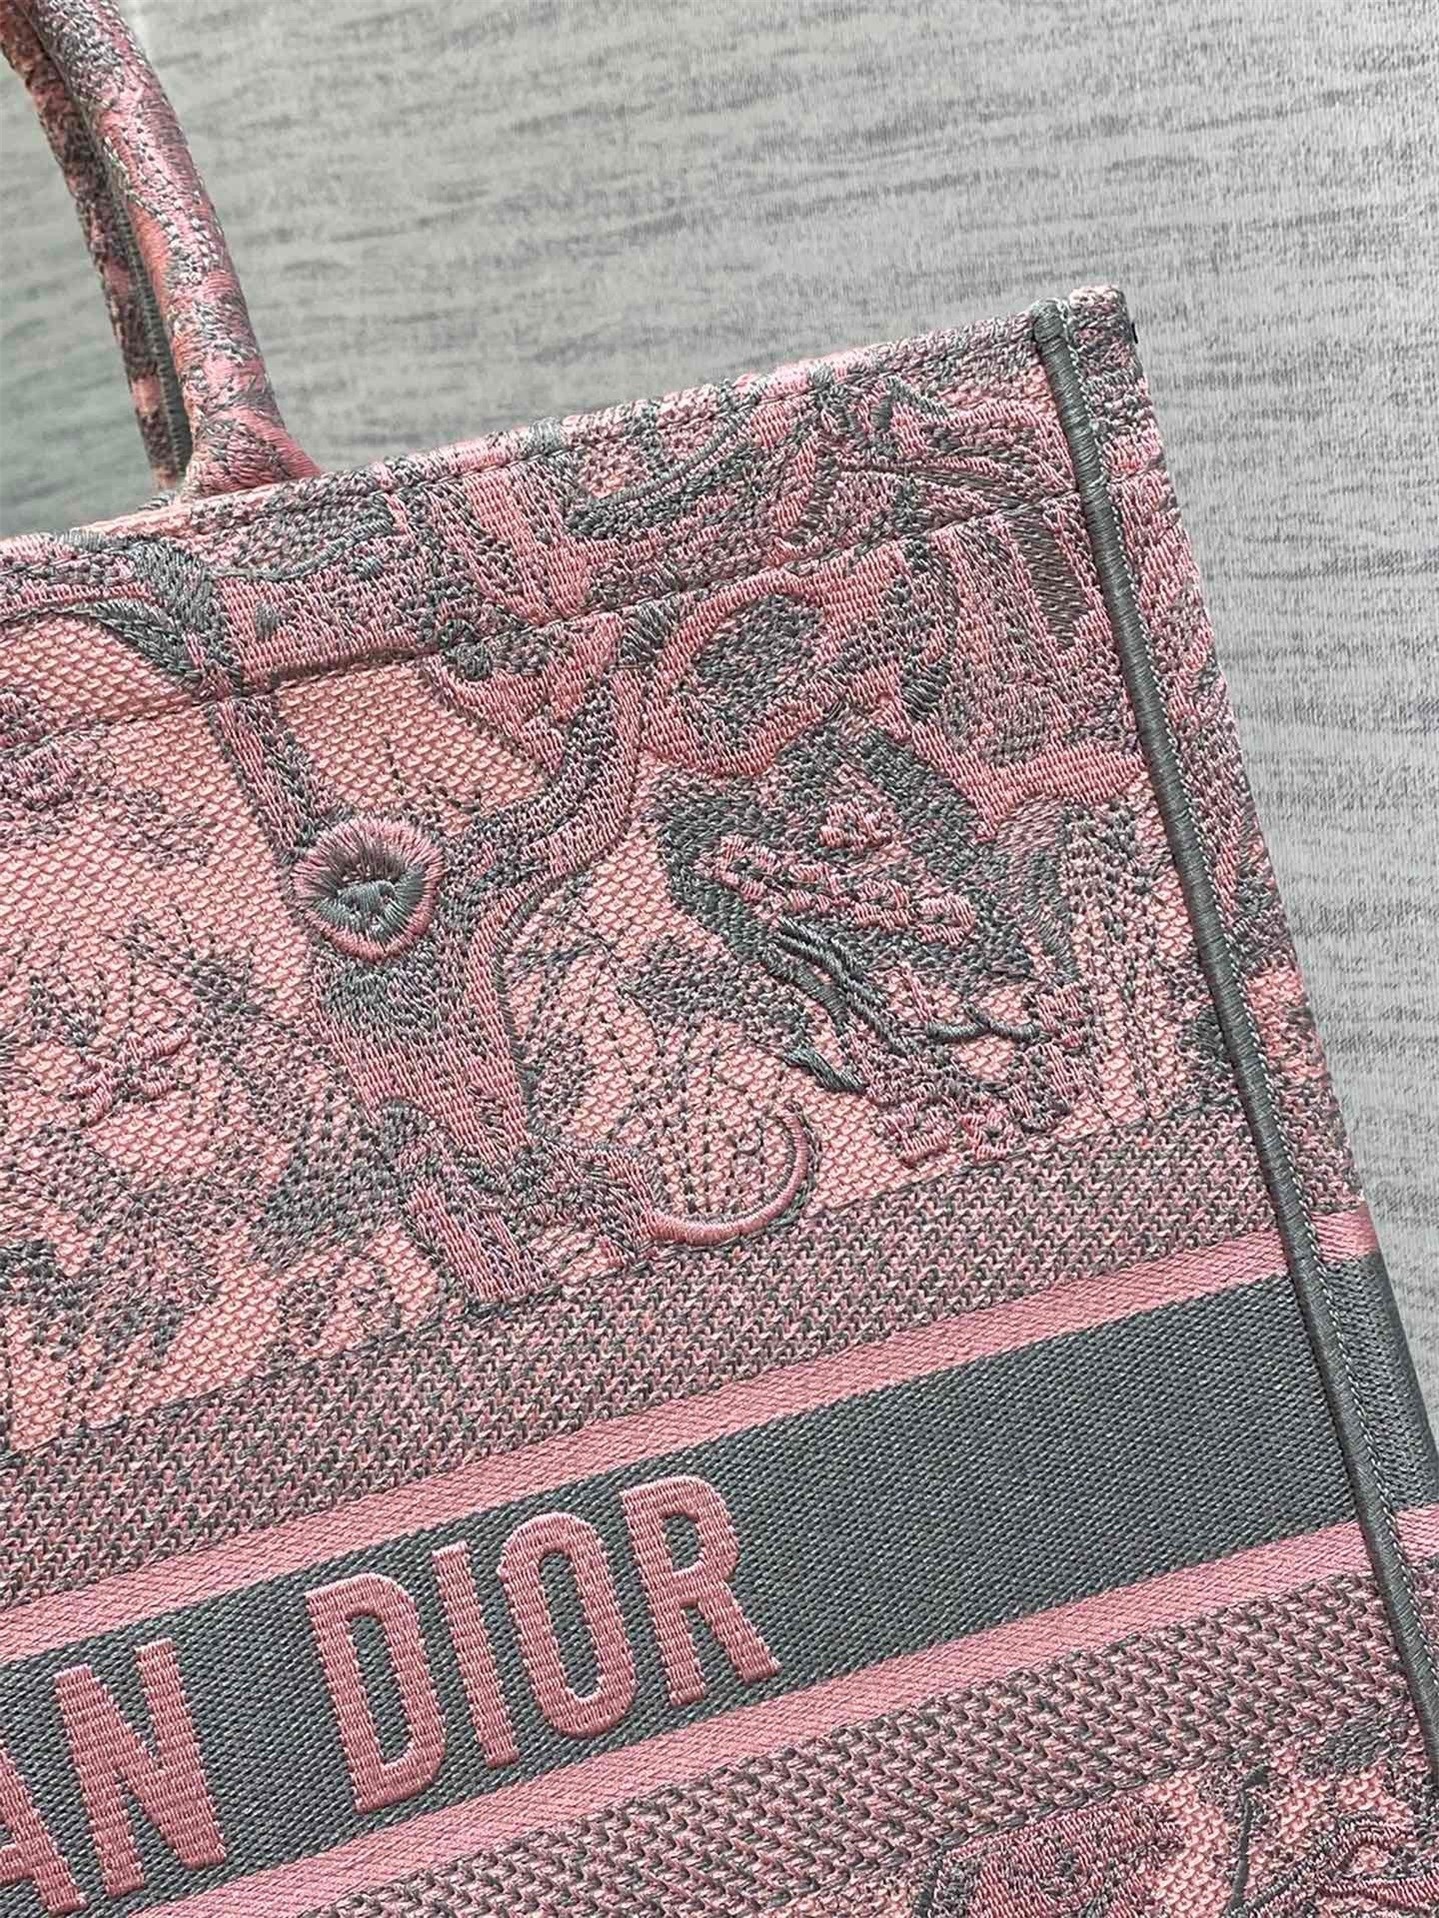 Dior Large Book Tote Bag in Pink and Gray Toile de Jouy Sauvage Embroidery 239